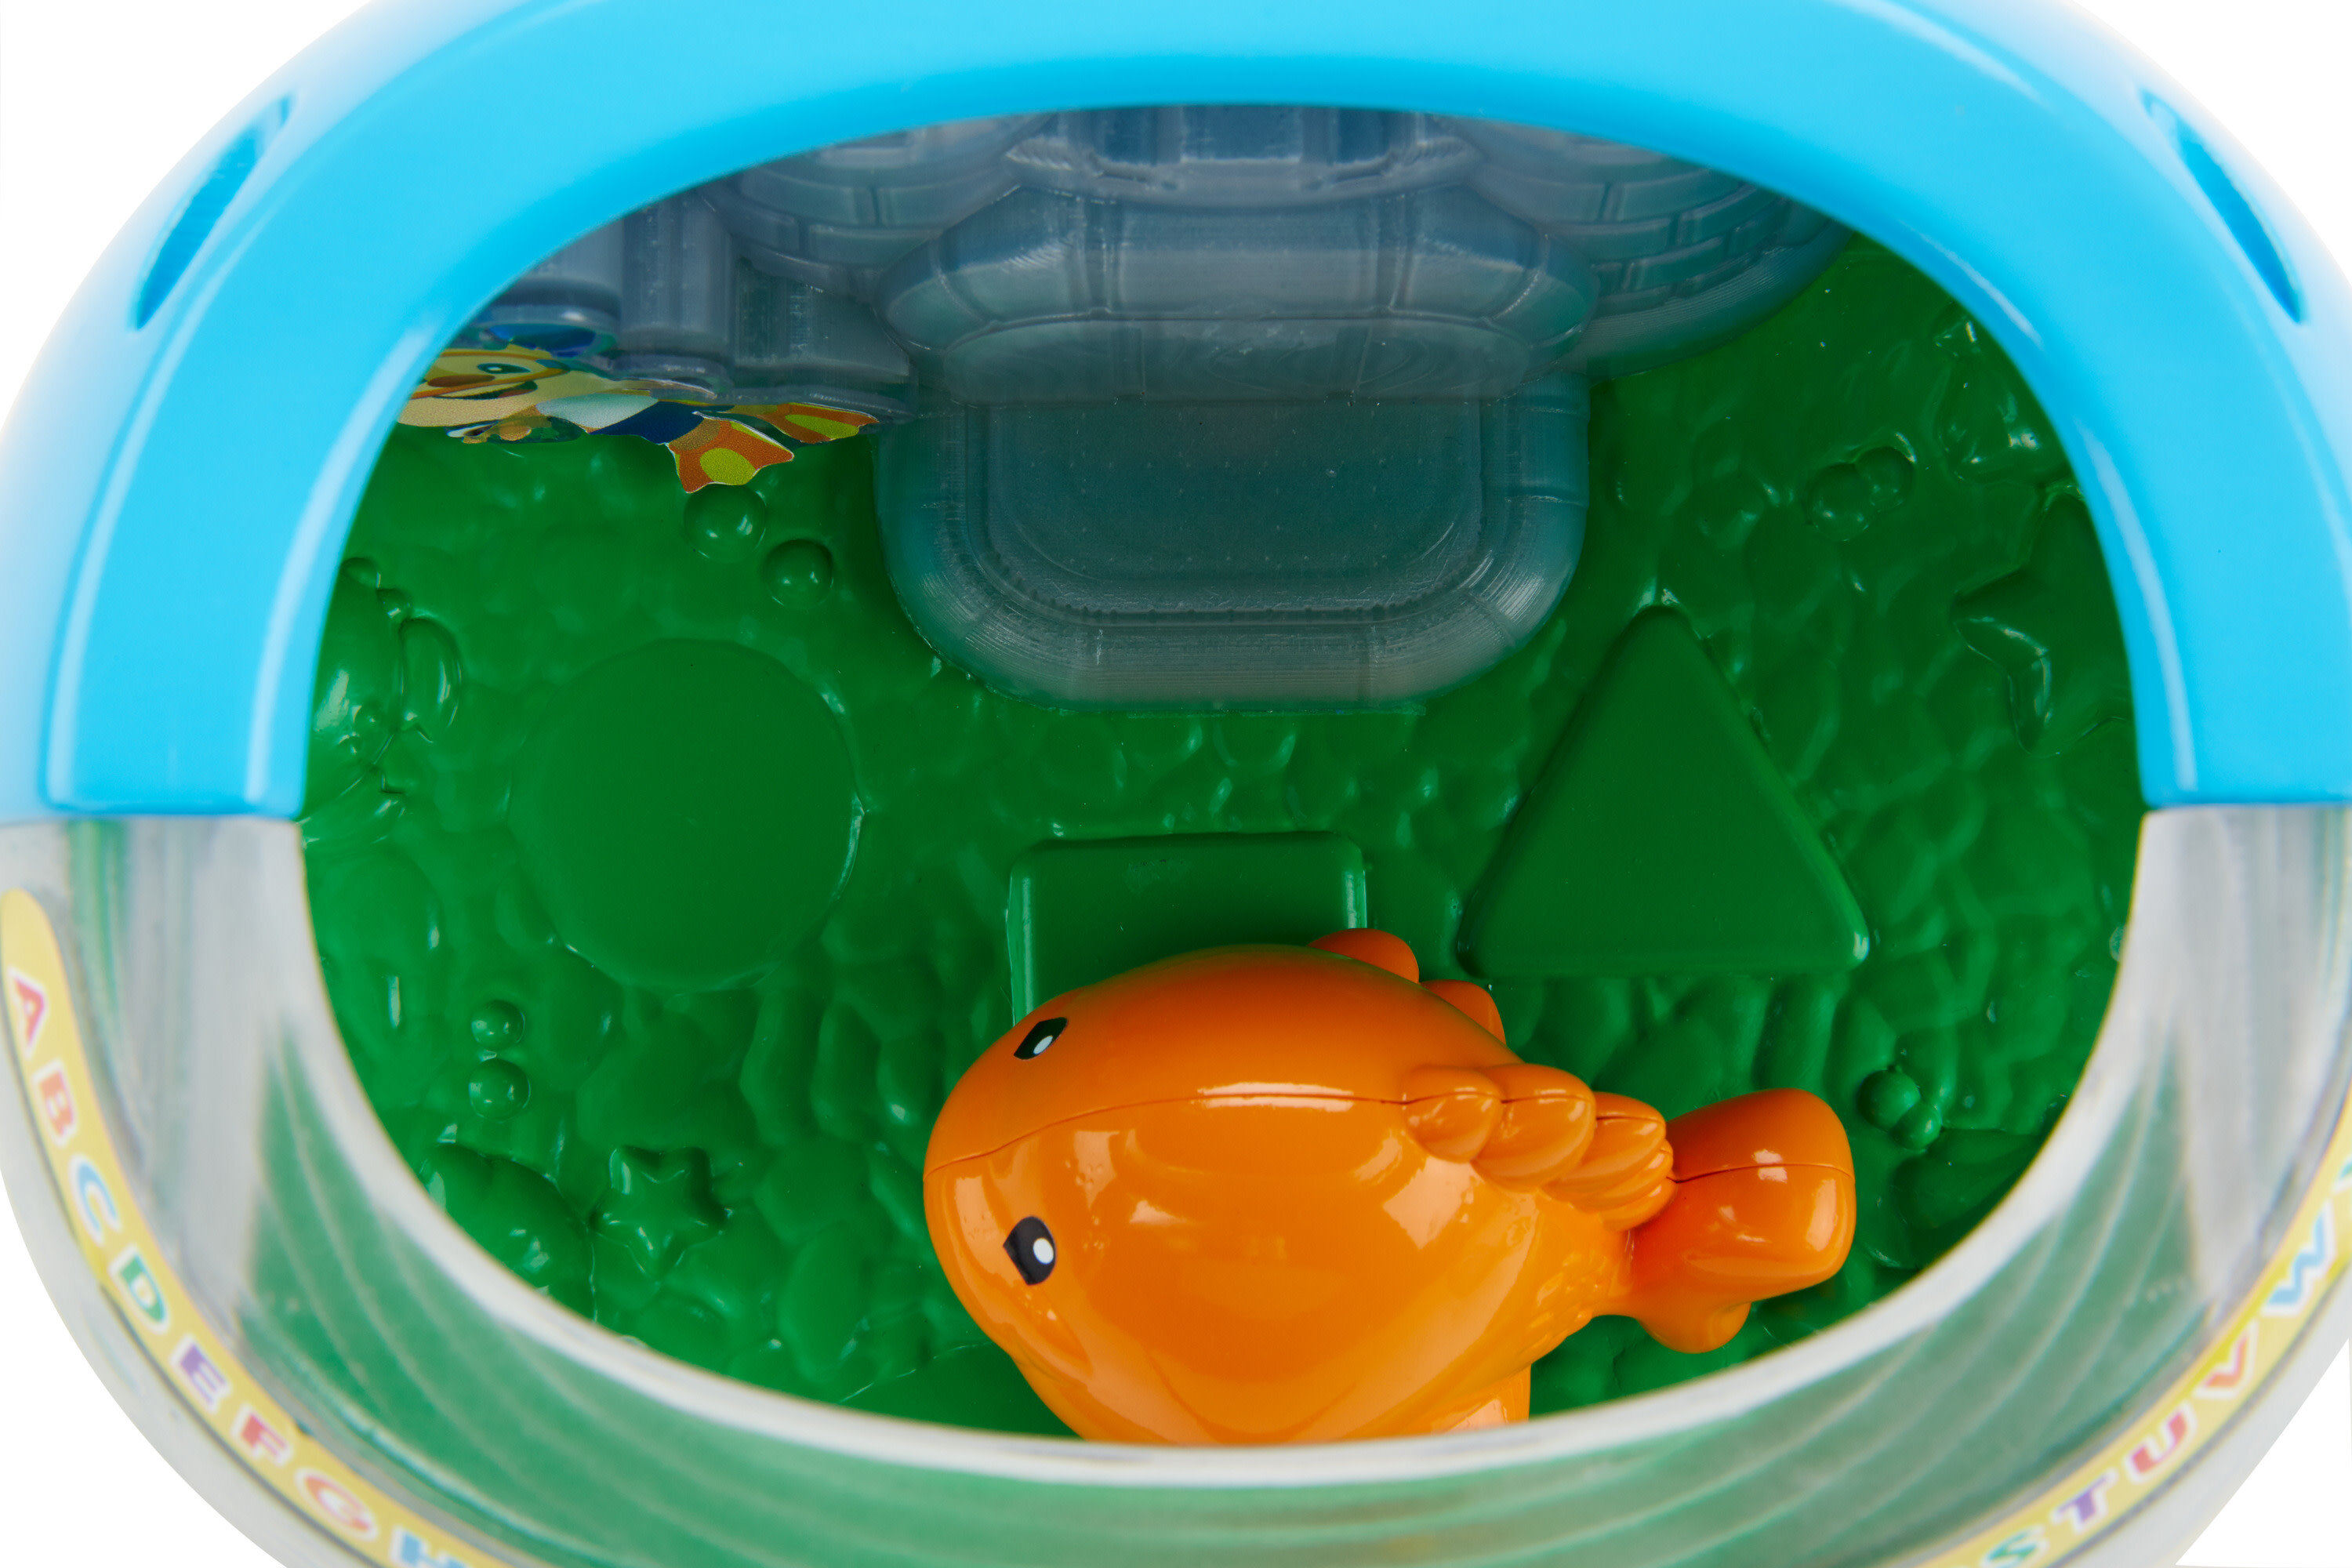 Fisher-Price Laugh & Learn Magical Lights Fishbowl Baby & Toddler Musical Learning Toy - image 5 of 7